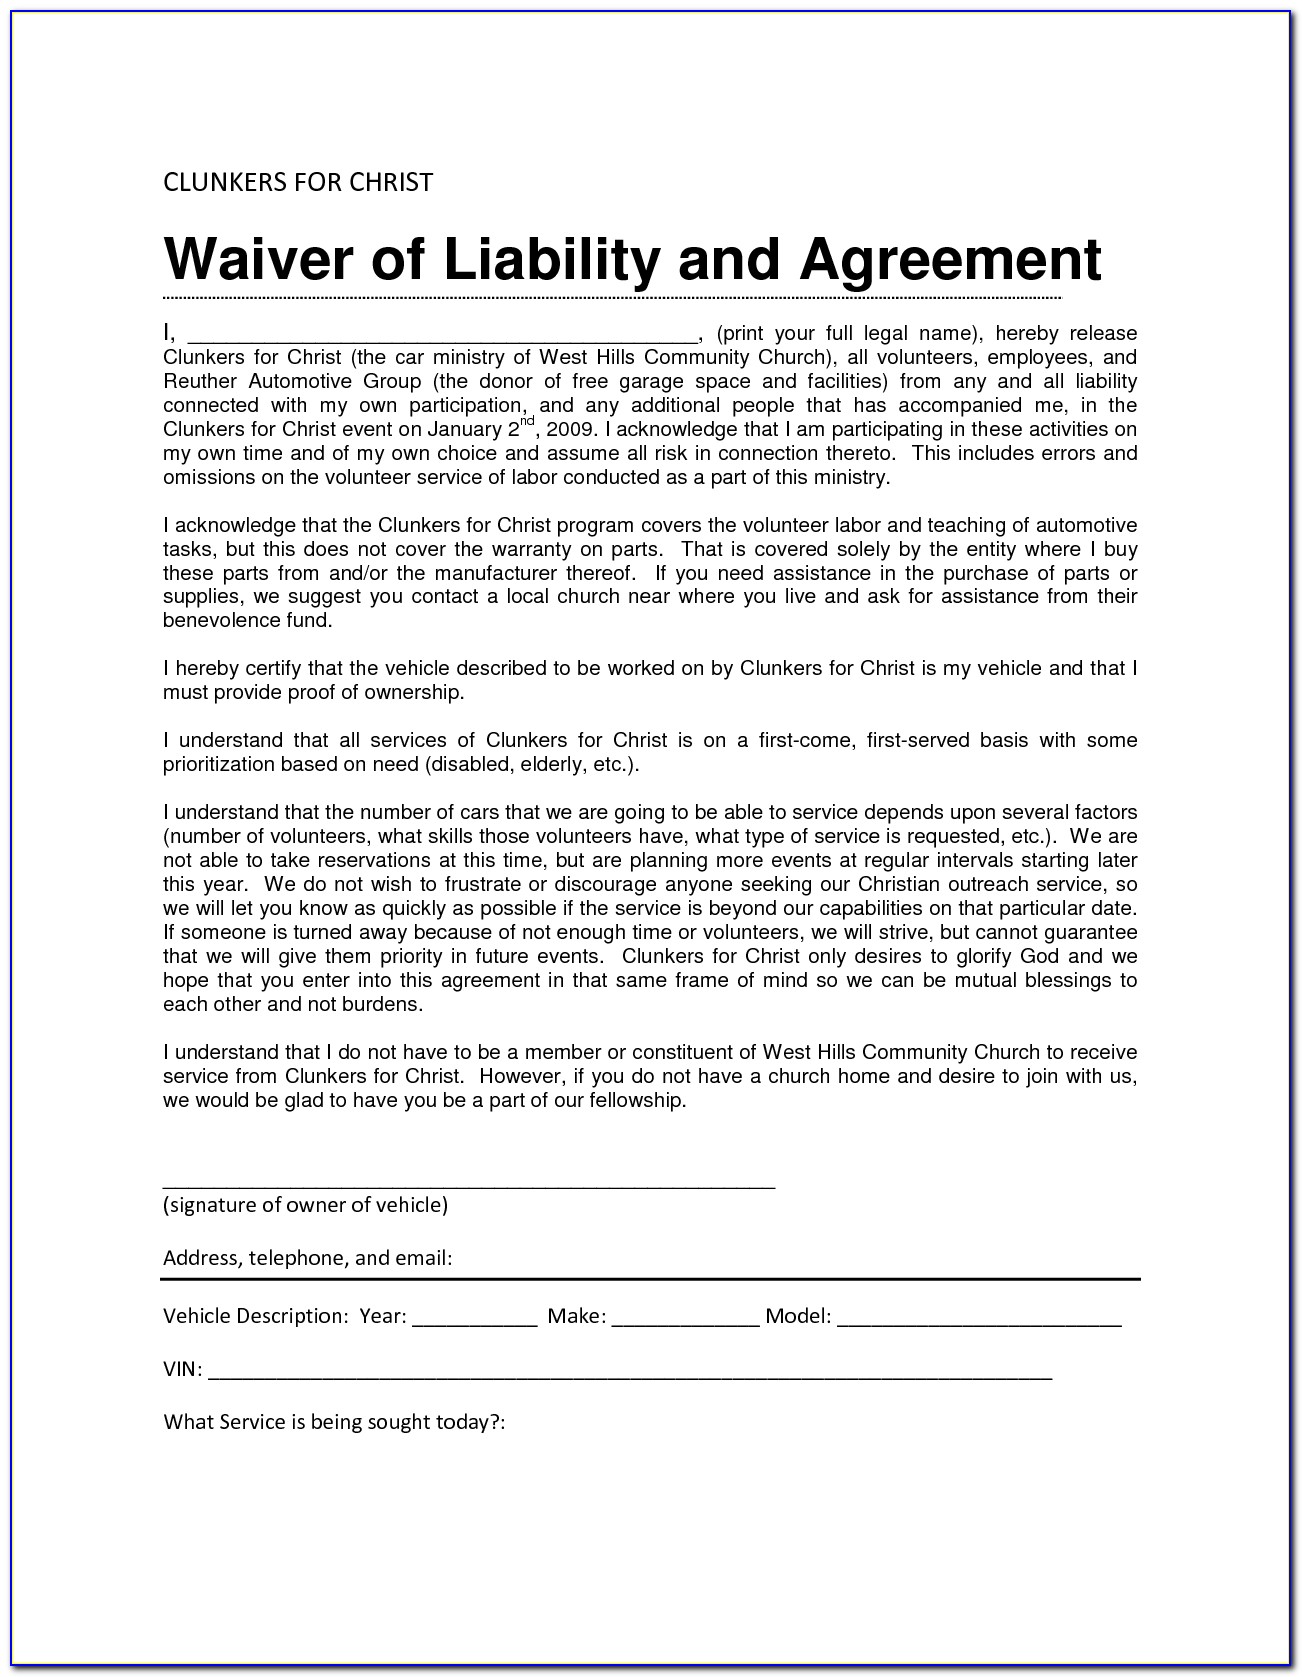 employee-health-insurance-waiver-form-template